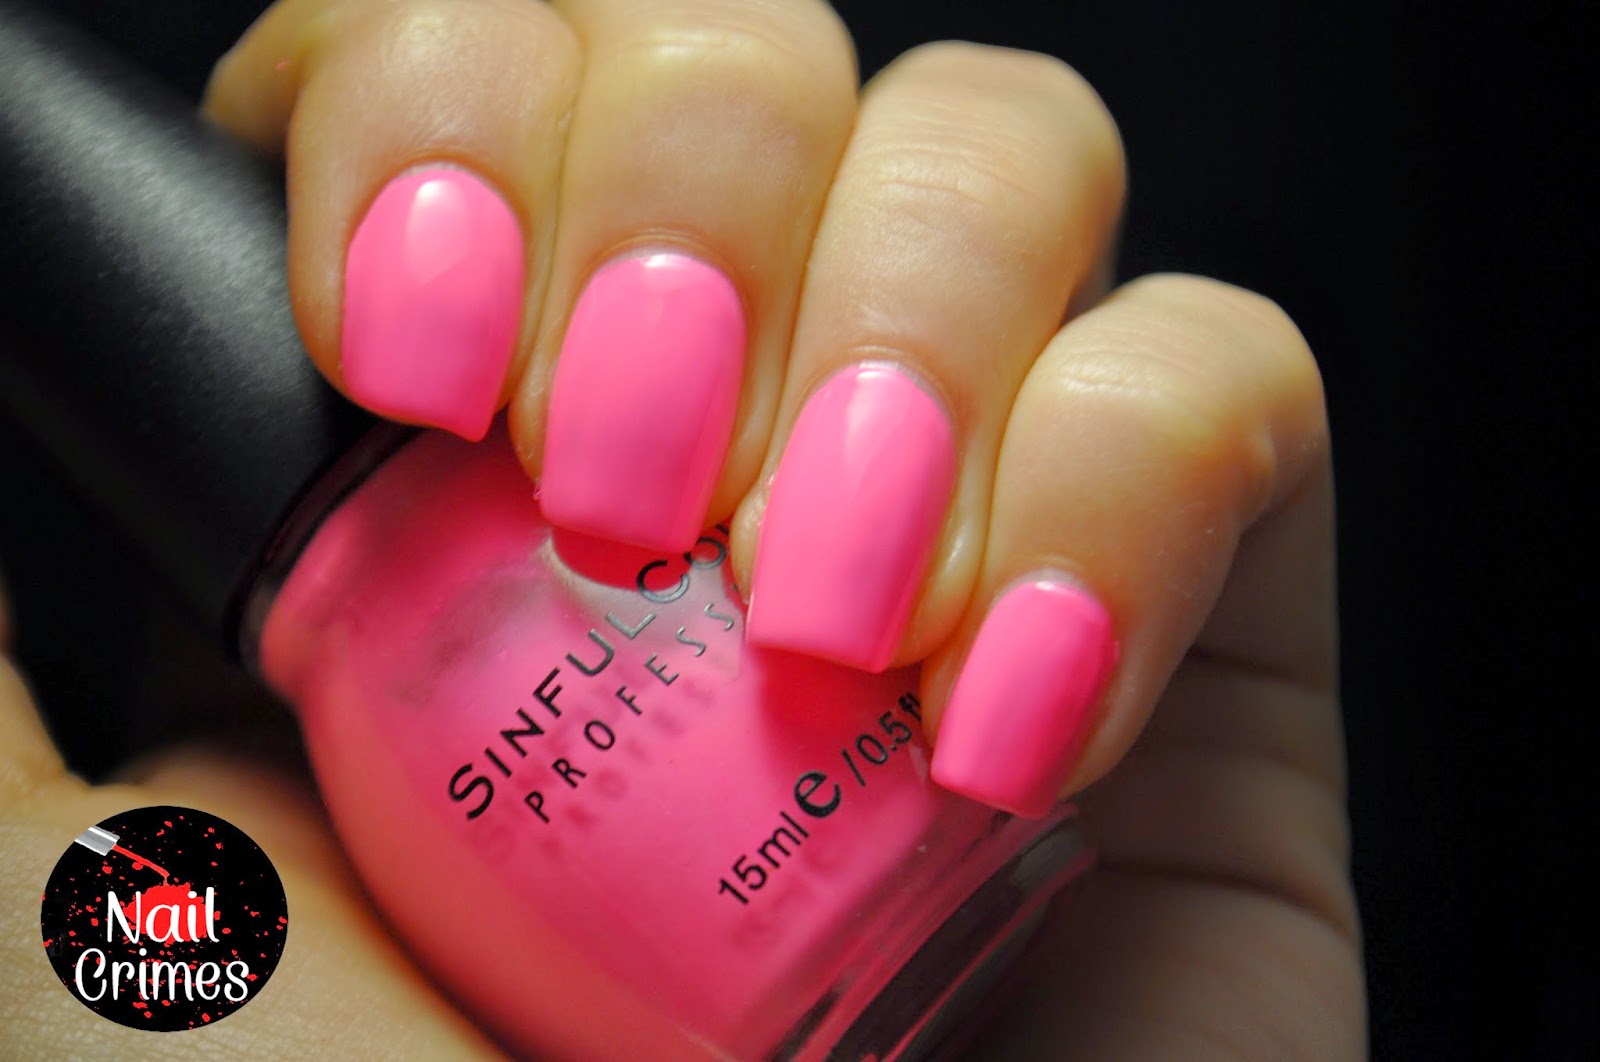 7. Sinful Colors Street Legal Nail Varnish - wide 1